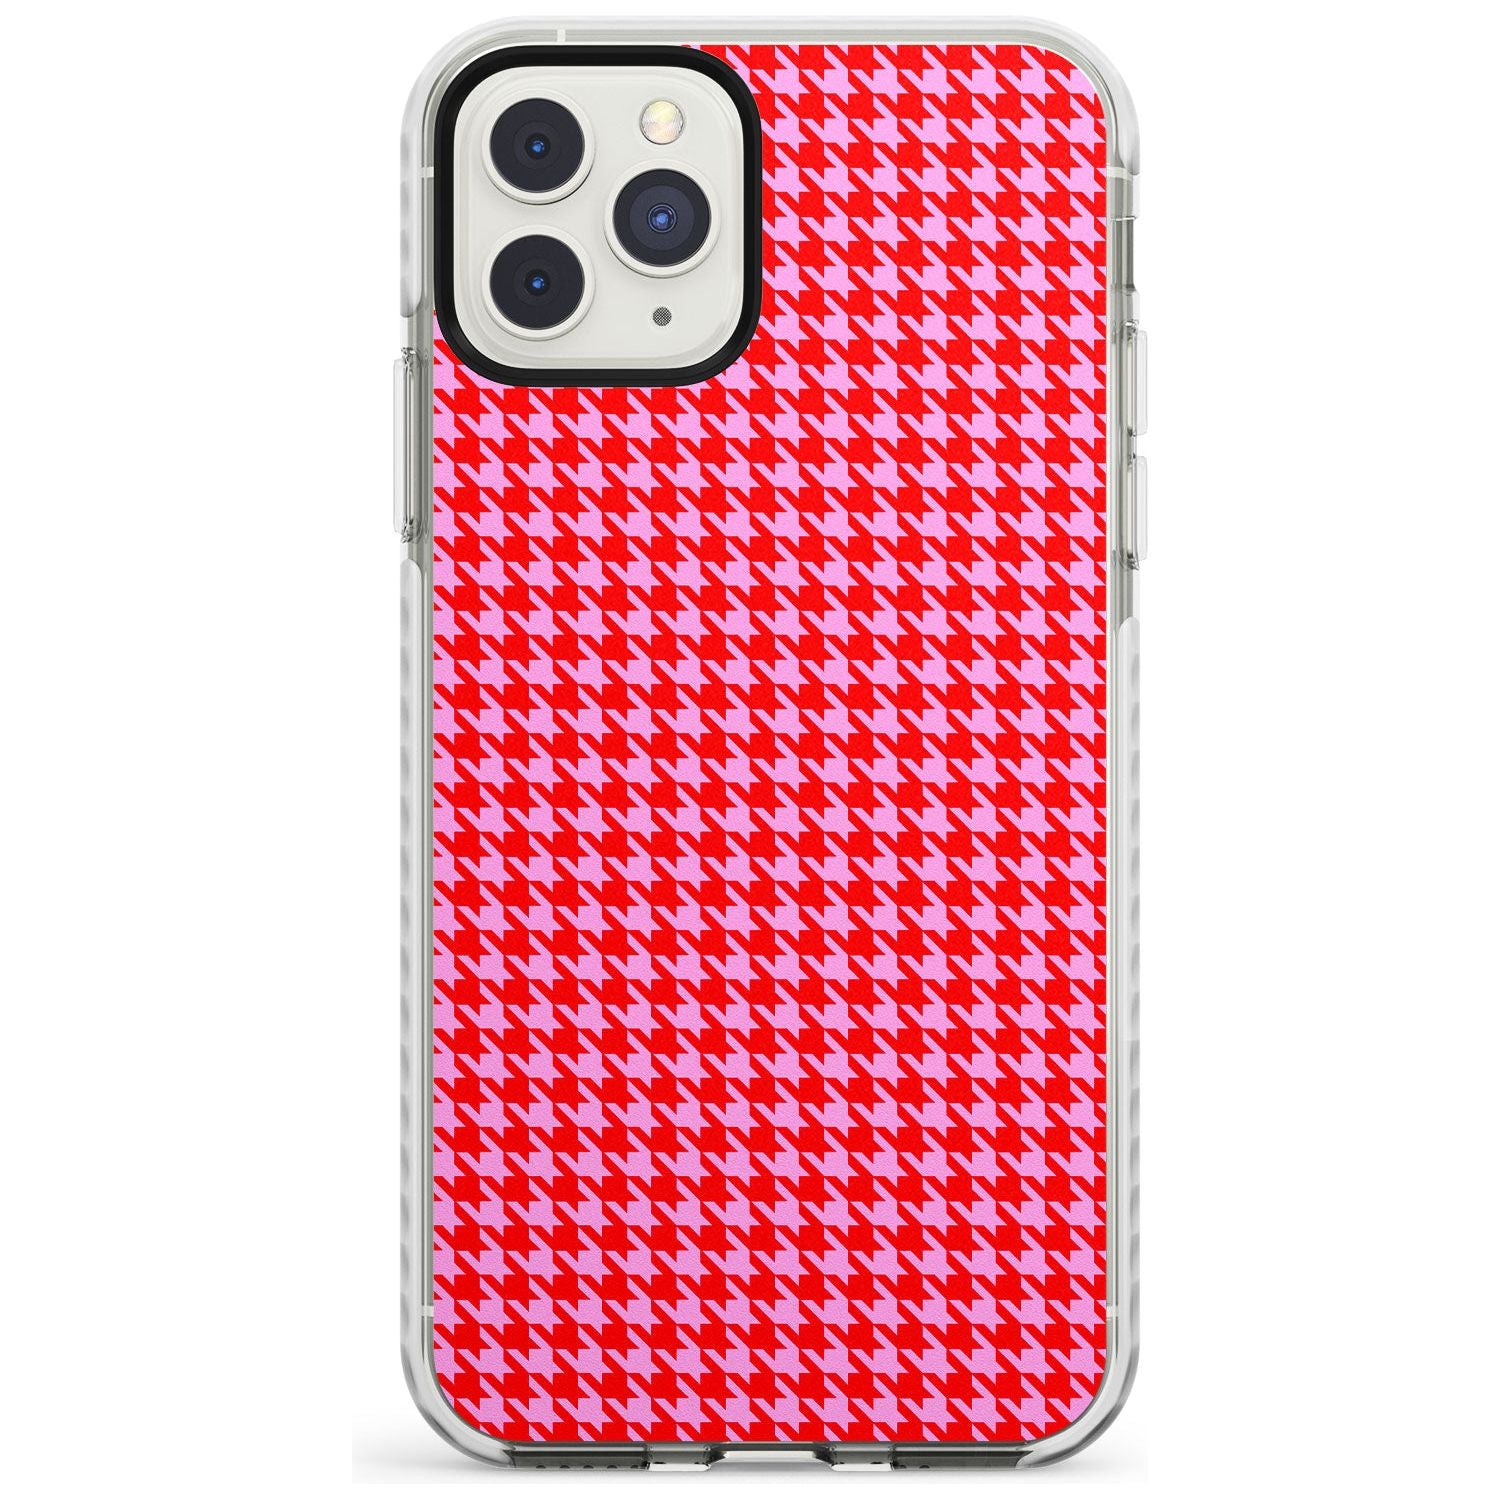 Neon Pink & Red Houndstooth Pattern Impact Phone Case for iPhone 11 Pro Max